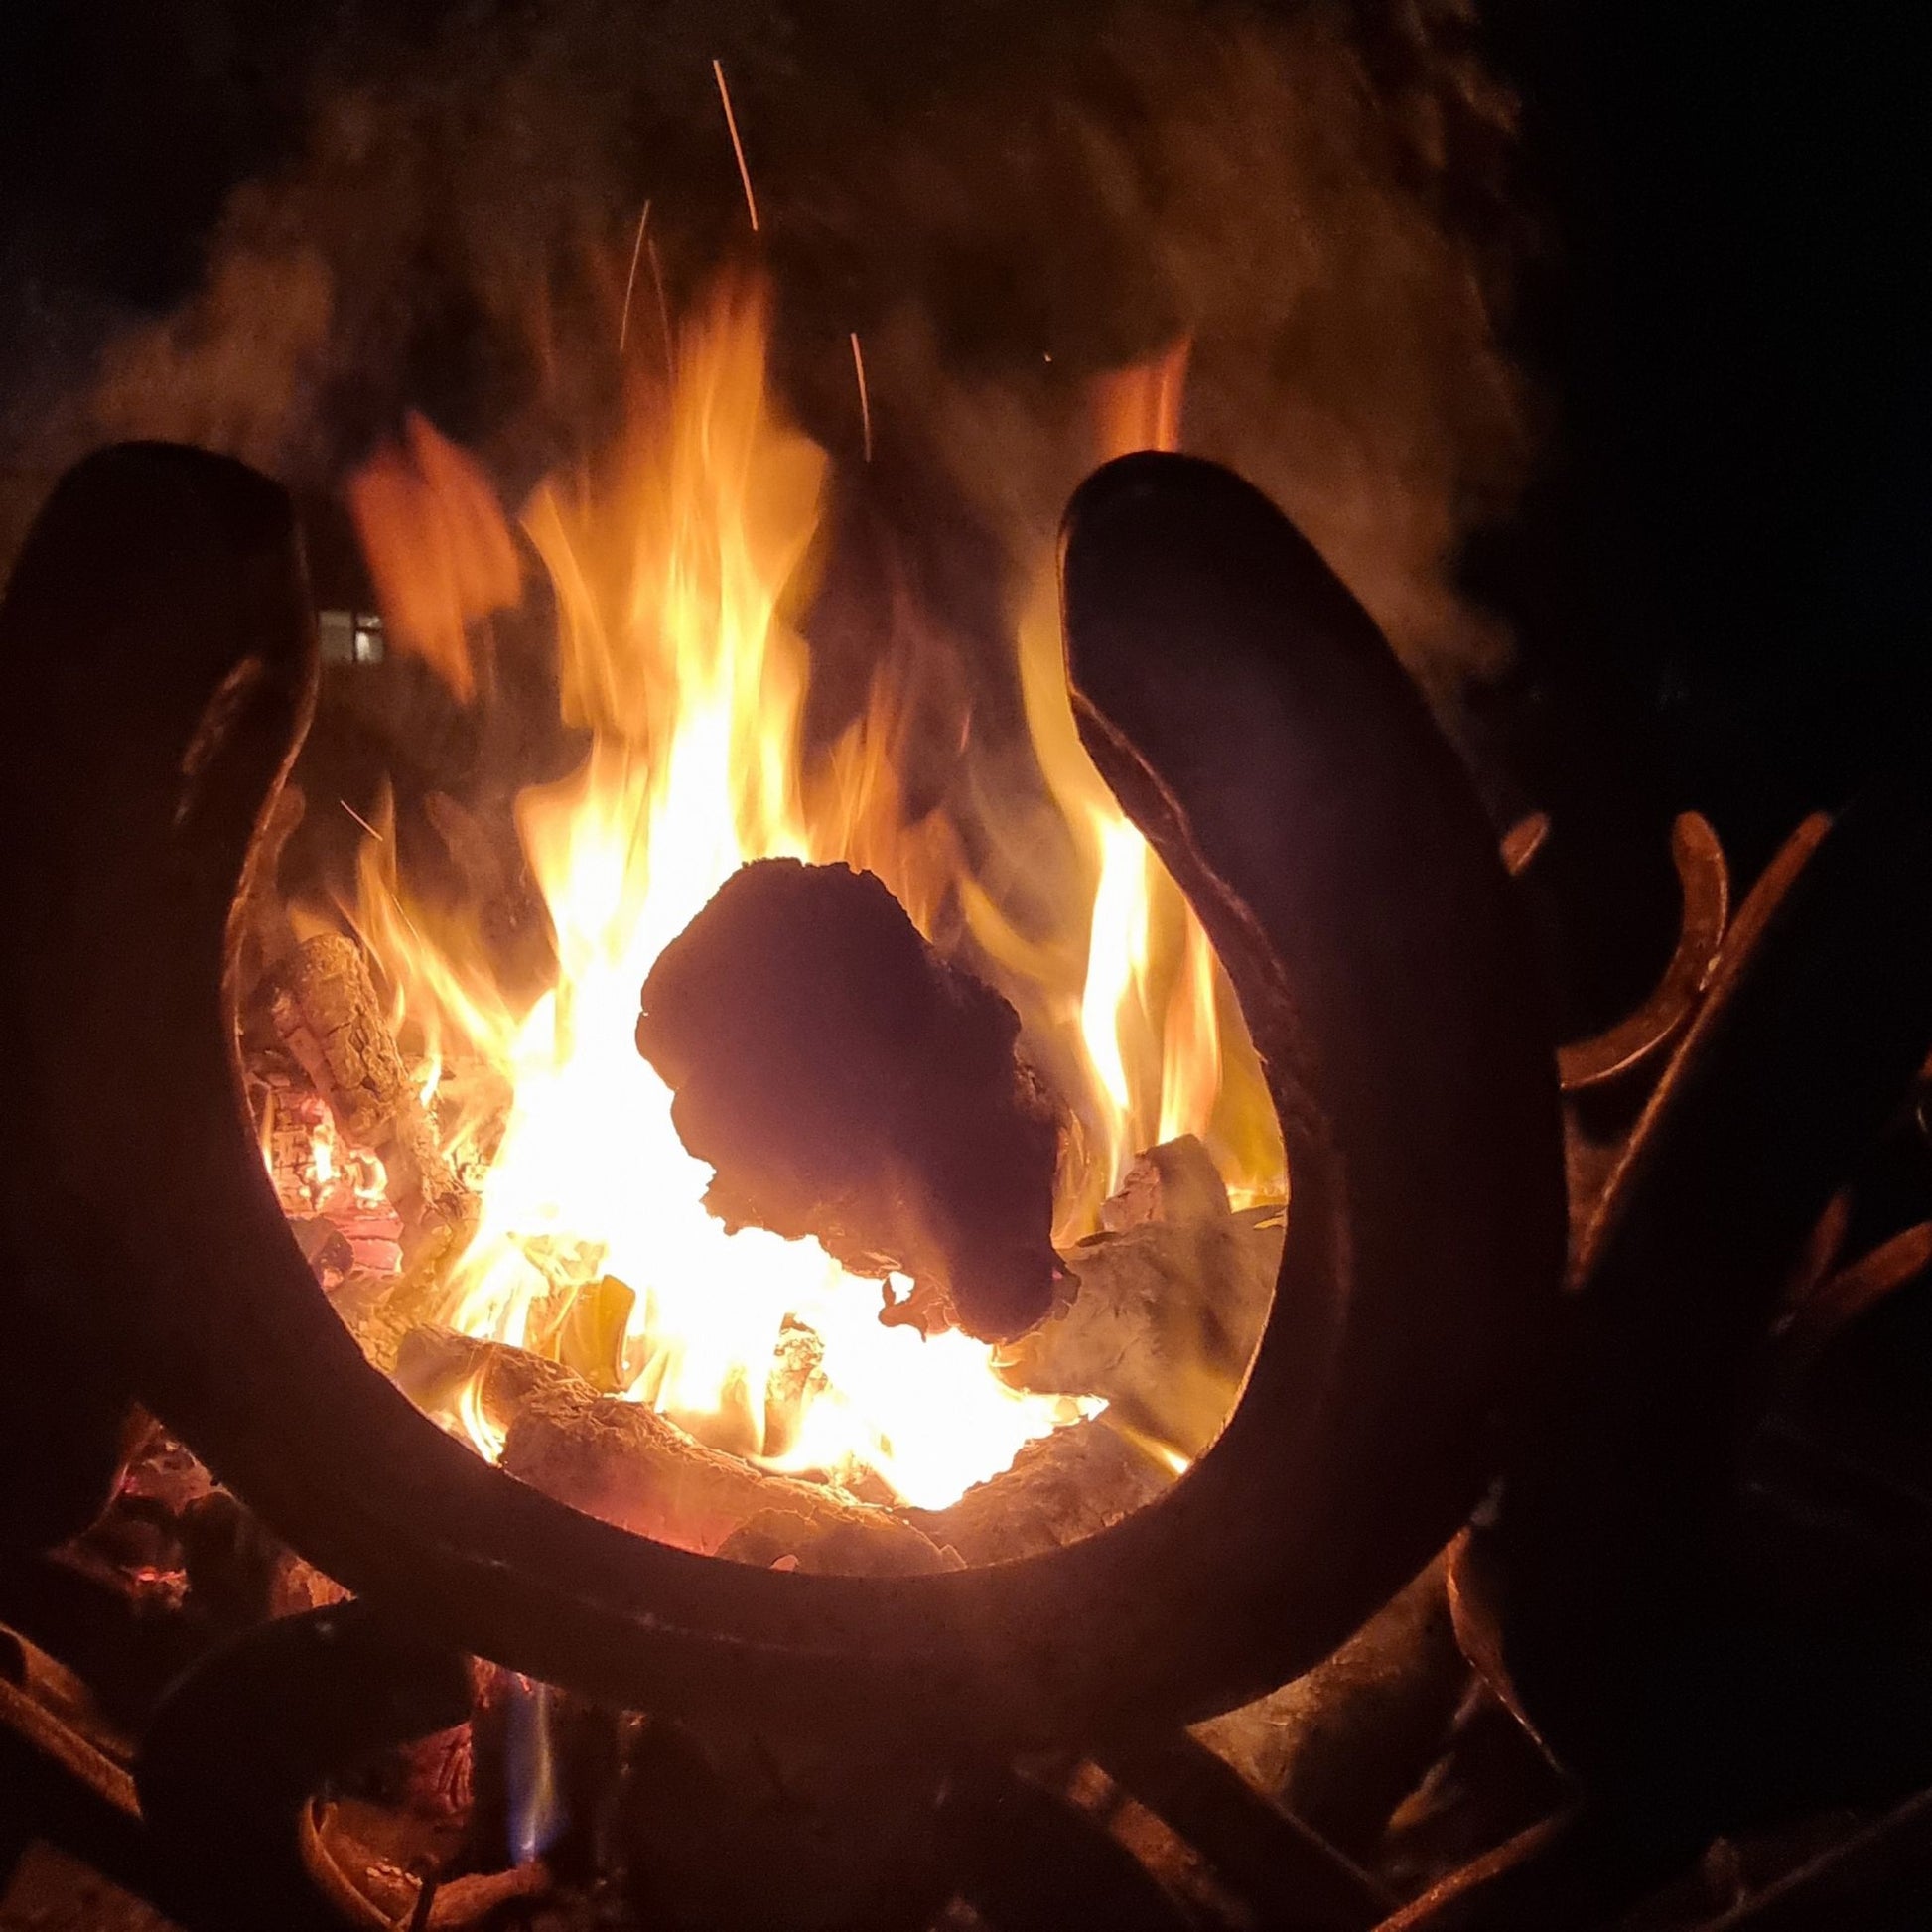 A closeup of wood on fire in a handmade horseshoe fire pit.